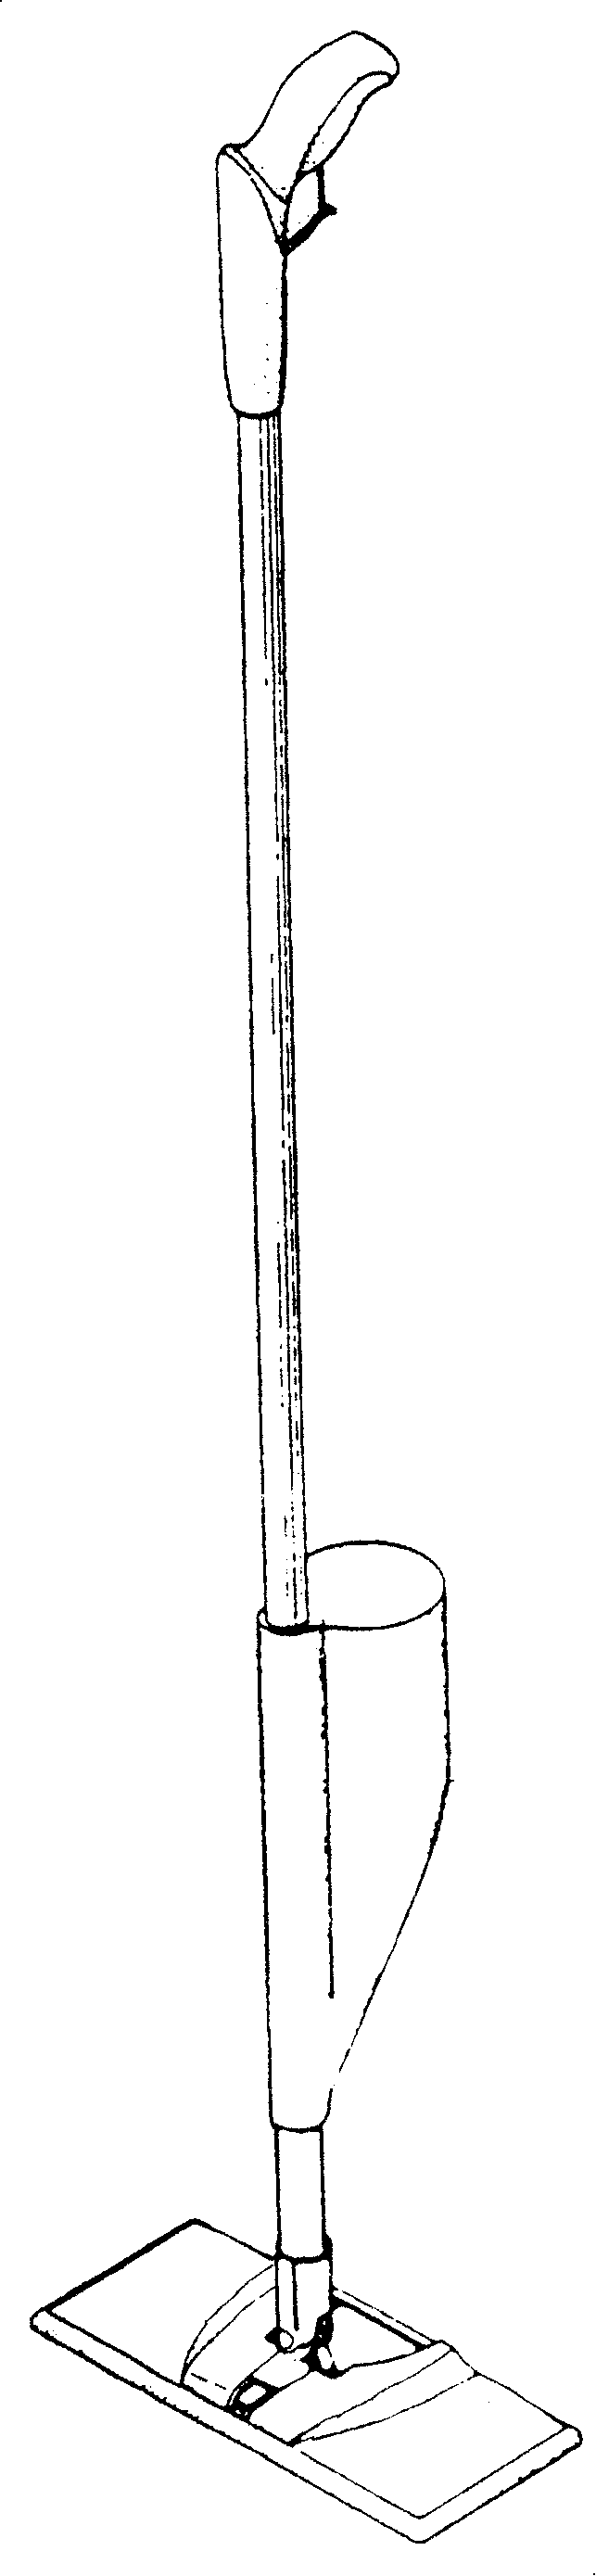 A cleaning implement having high absorbent capacity